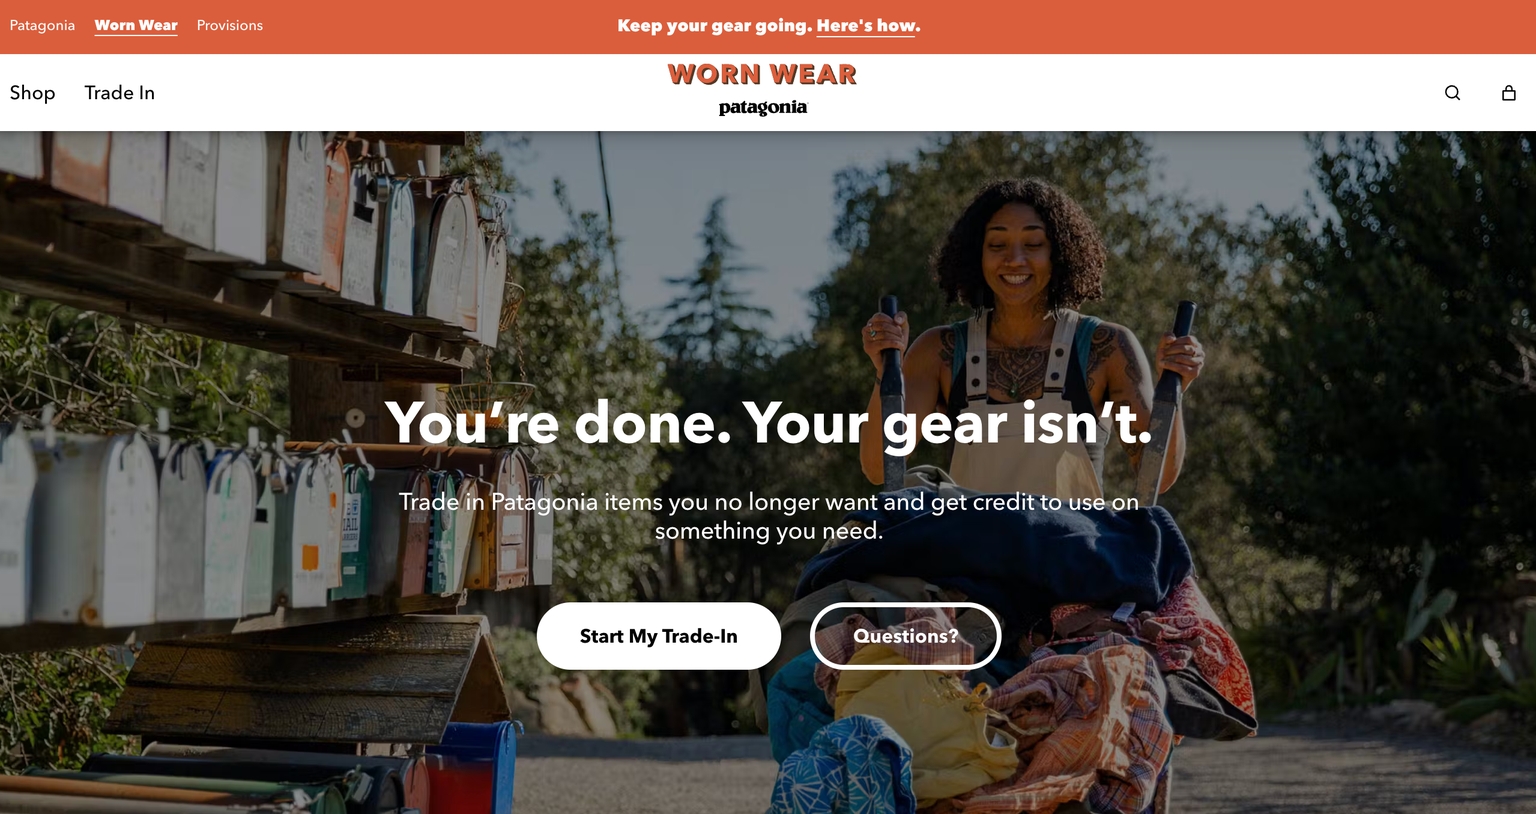 Worn Wear allows you to trade in or purchase used products from Patagonia to address the growing effect waste has on environment. Image credit: Worn Wear